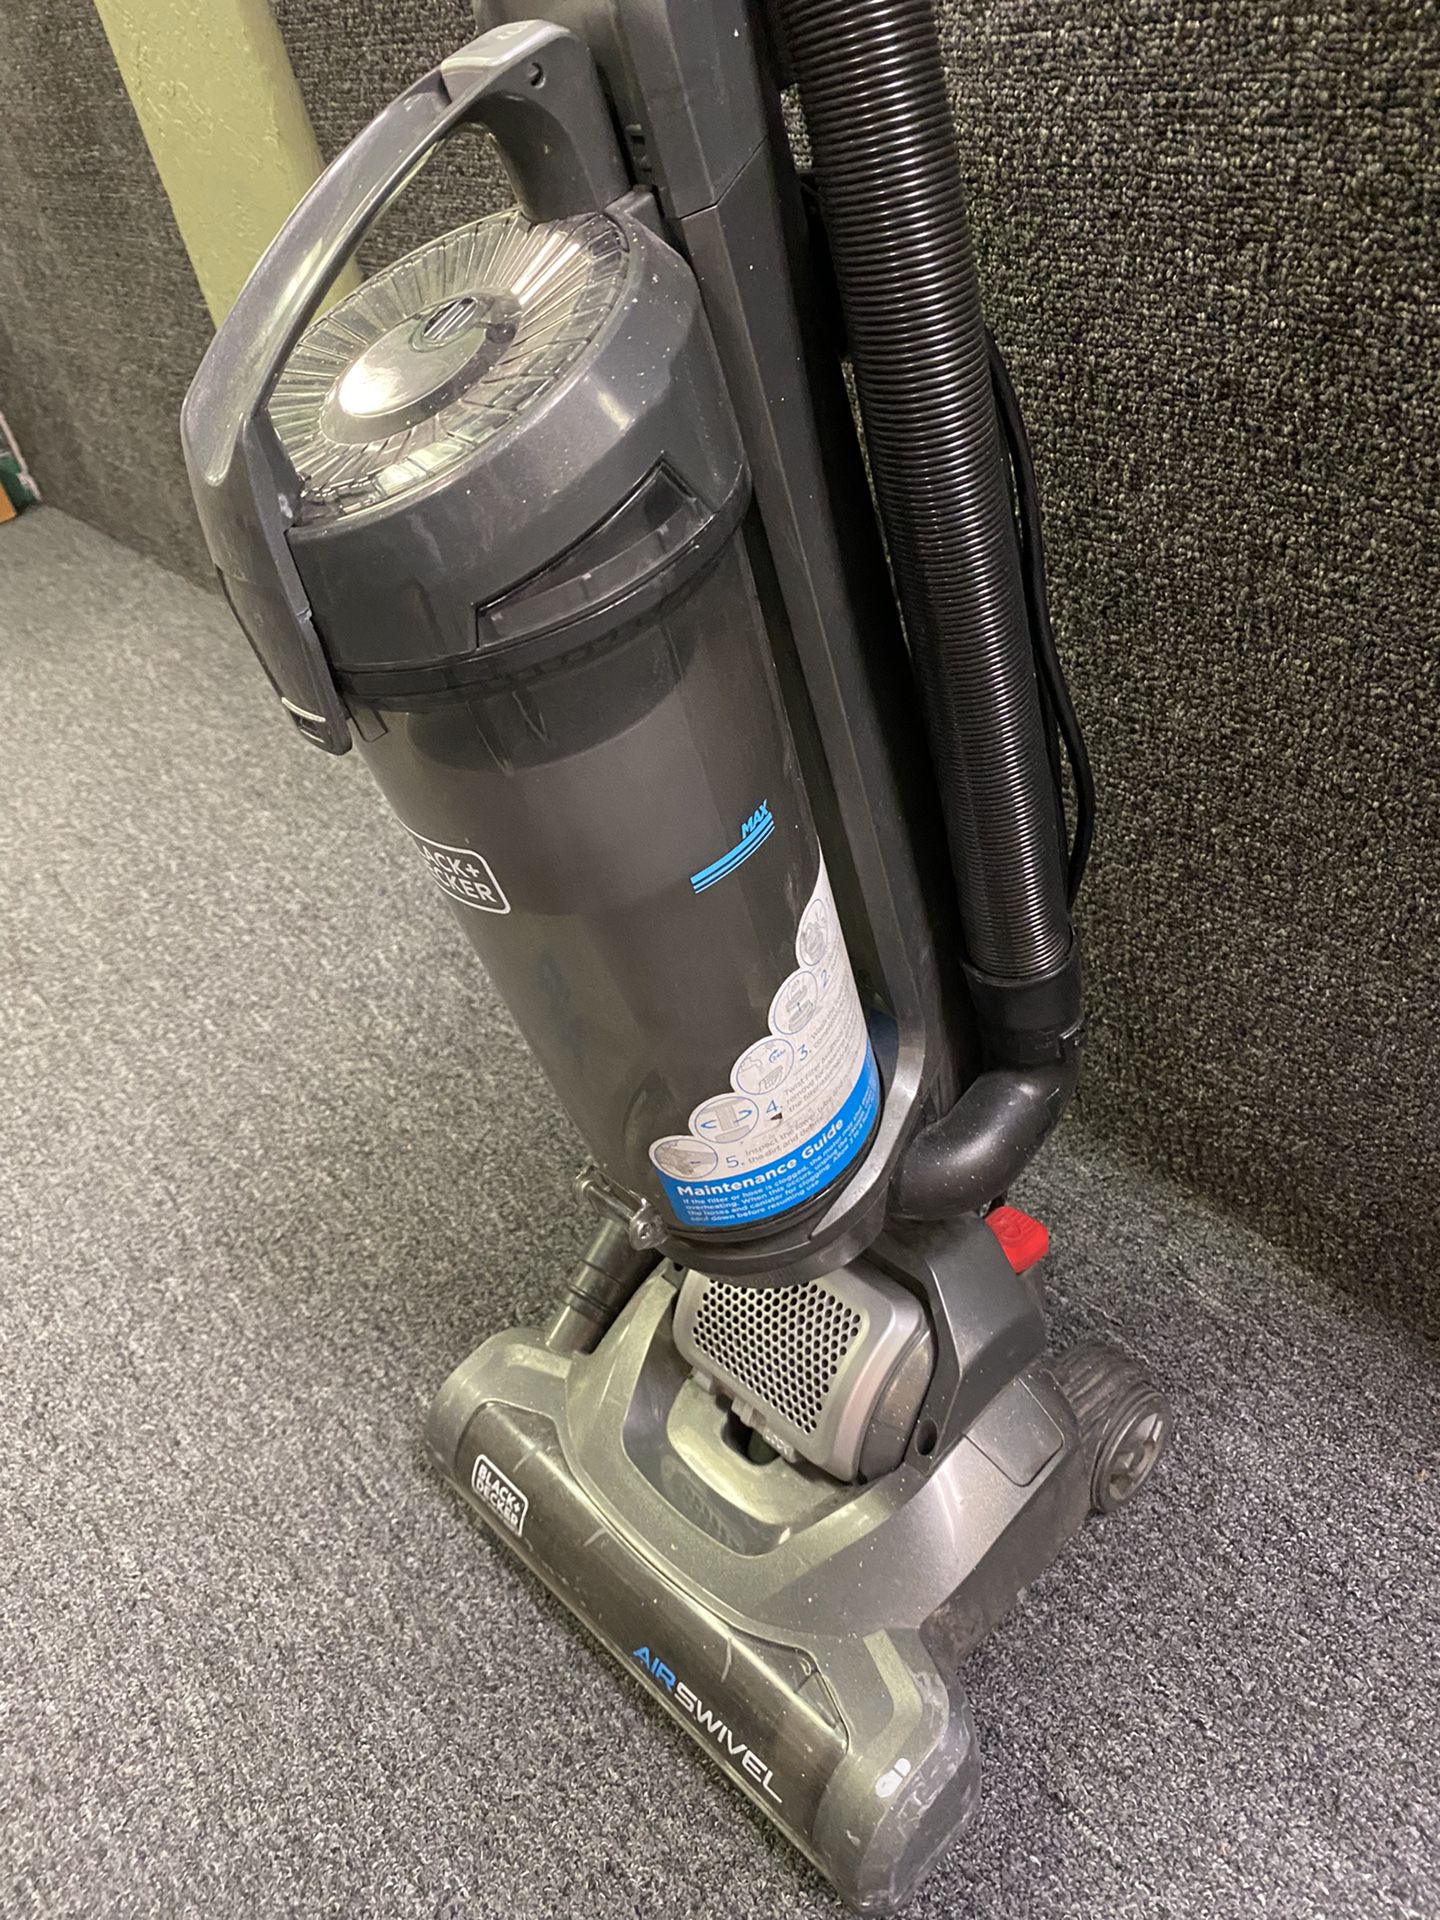 Black+ Decker Airswivel Vacuum for Sale in Raleigh, NC - OfferUp